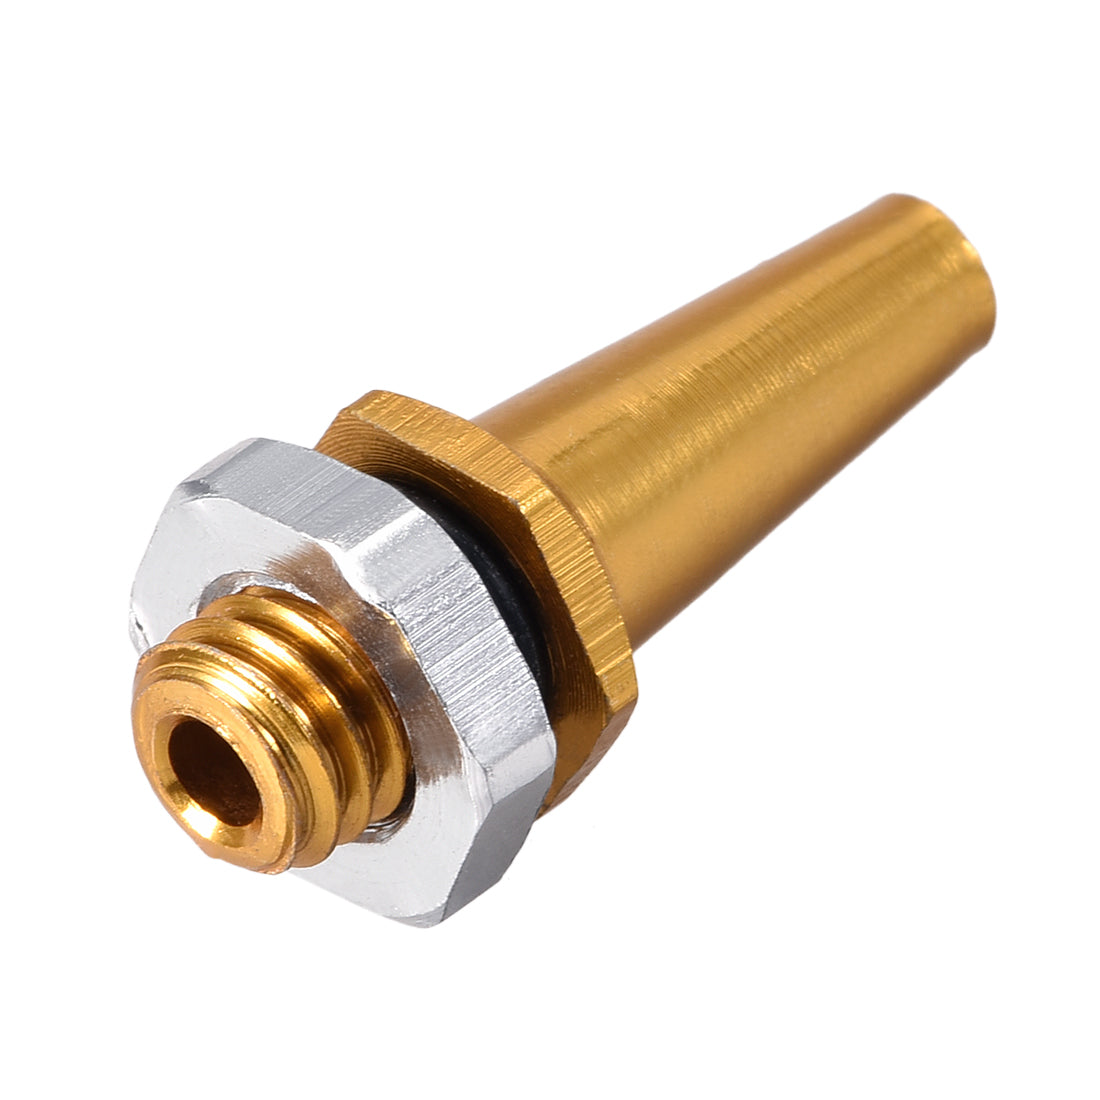 uxcell Uxcell RC Antenna Mount, M6 Thread, Aluminum Alloy, for RC Boat Golden